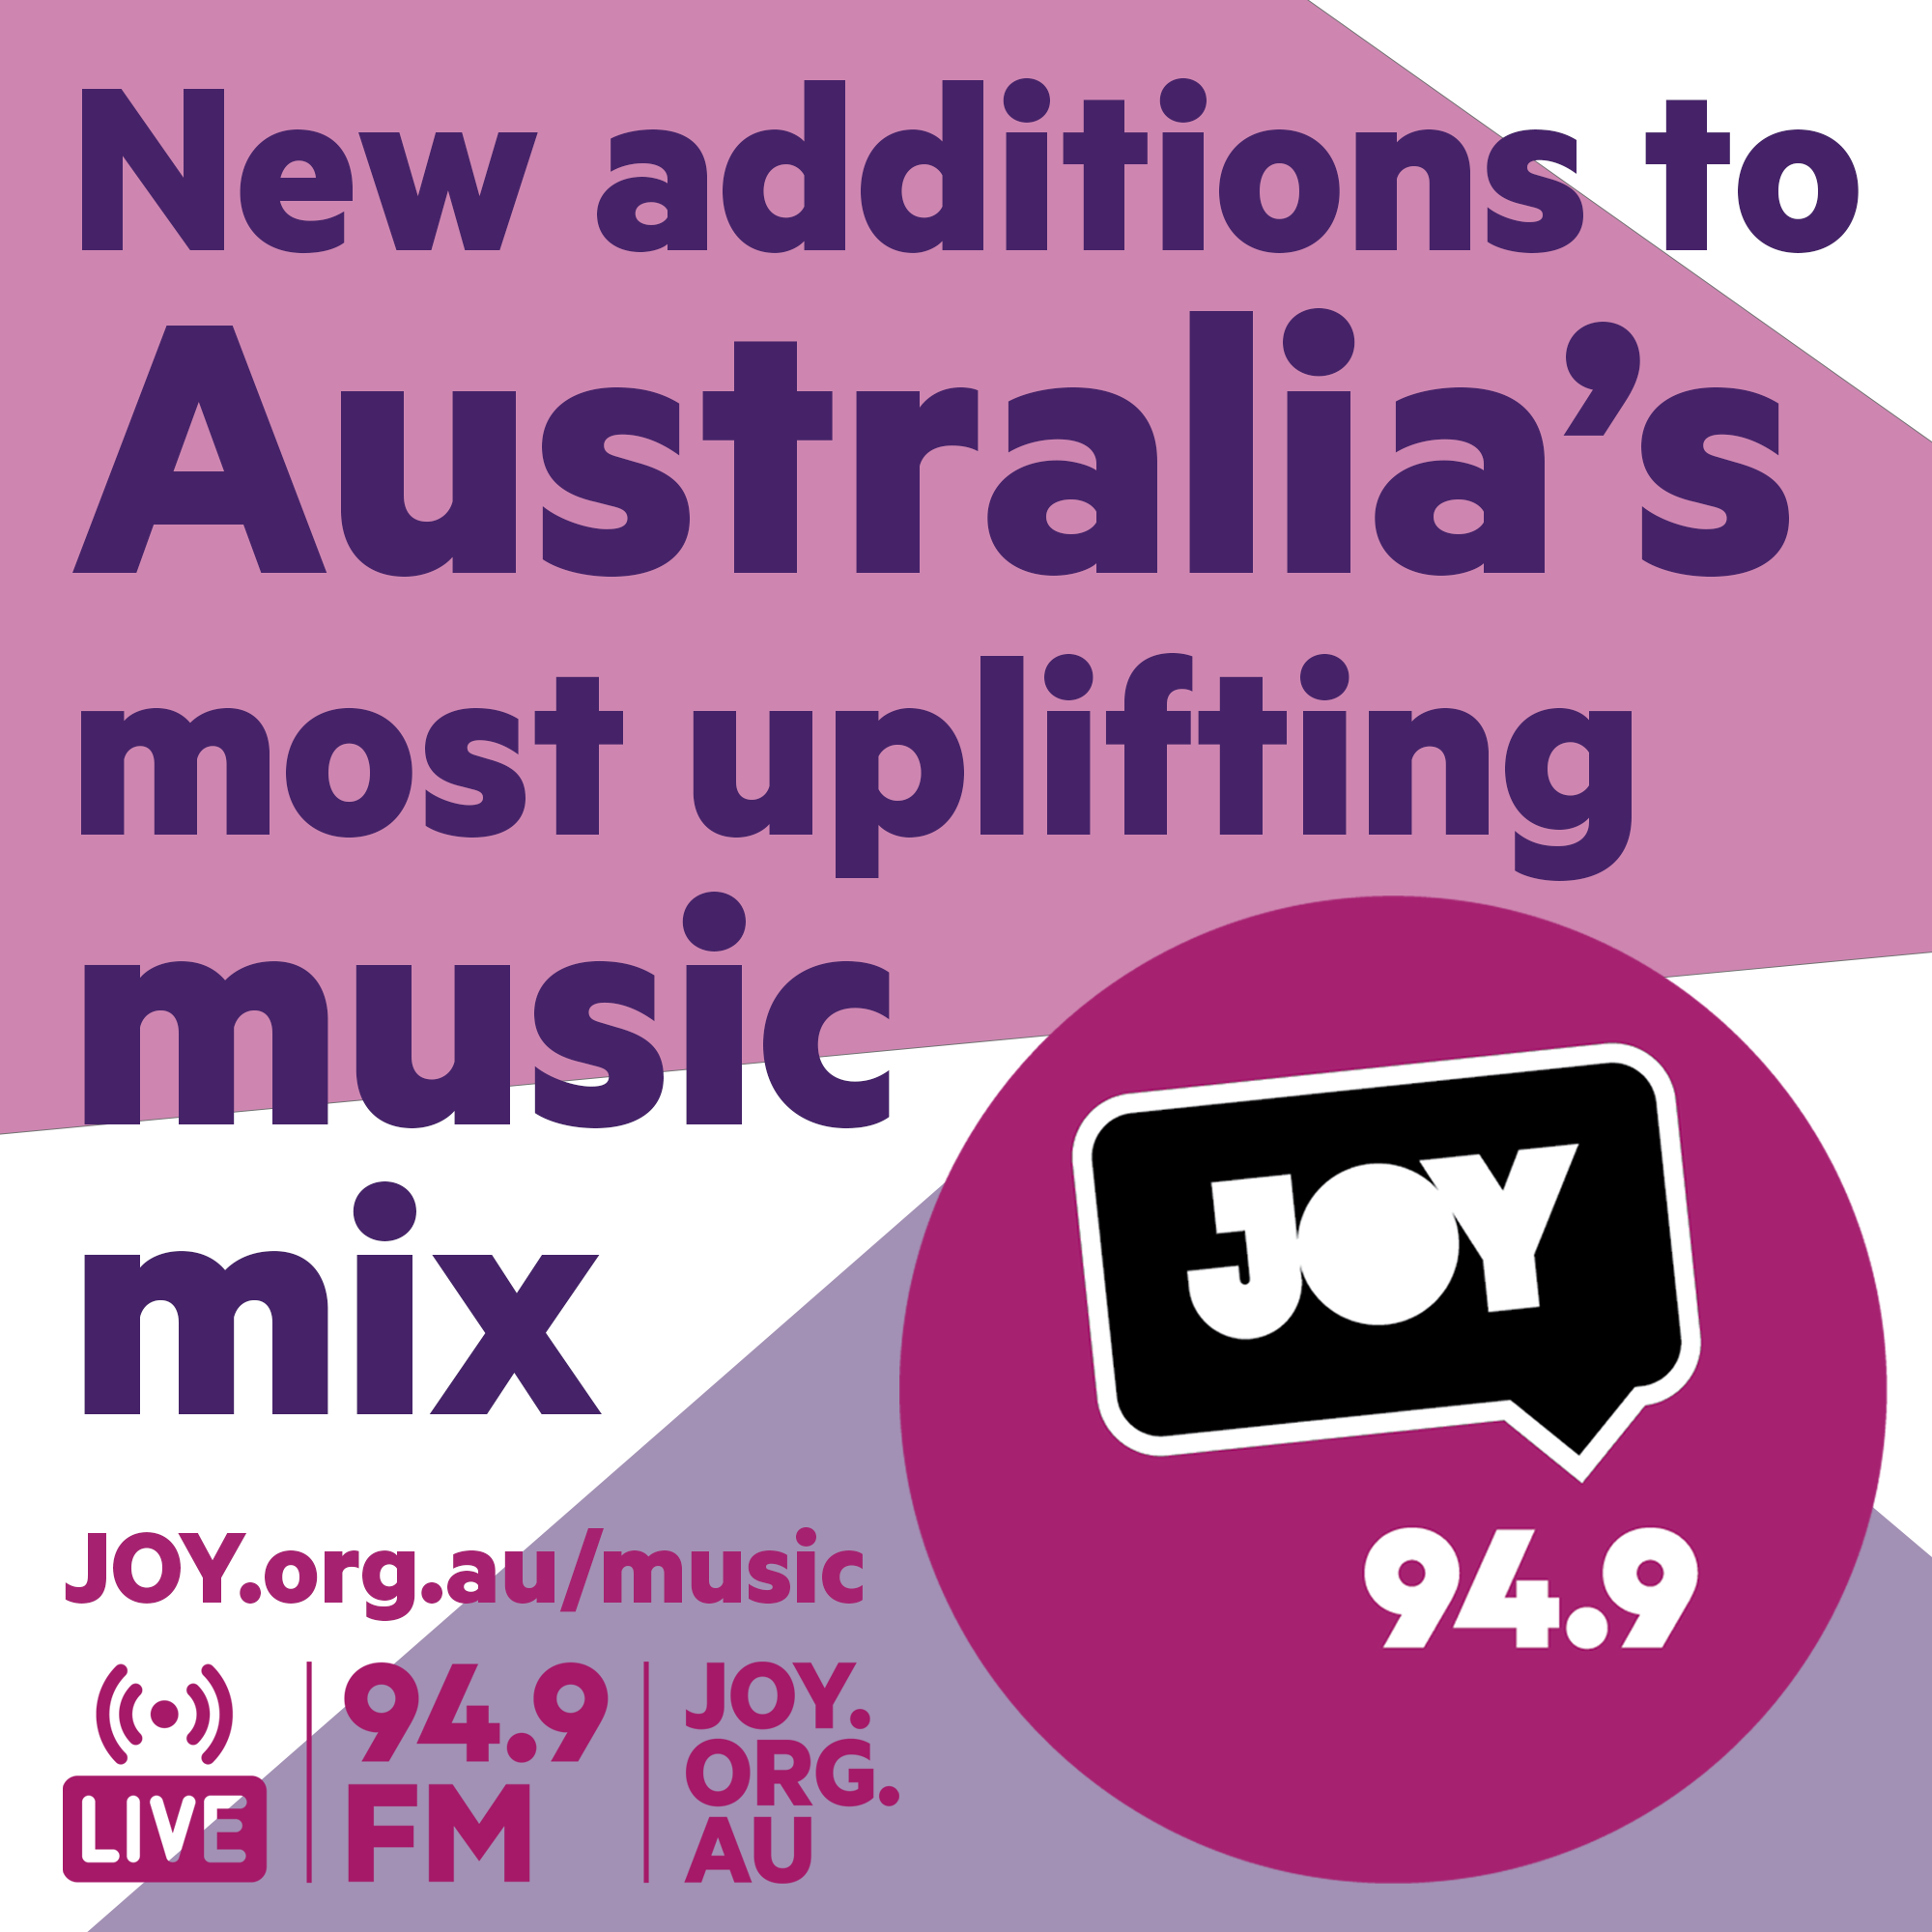 The newest songs to Australia’s most uplifting music mix: 9 February 2022